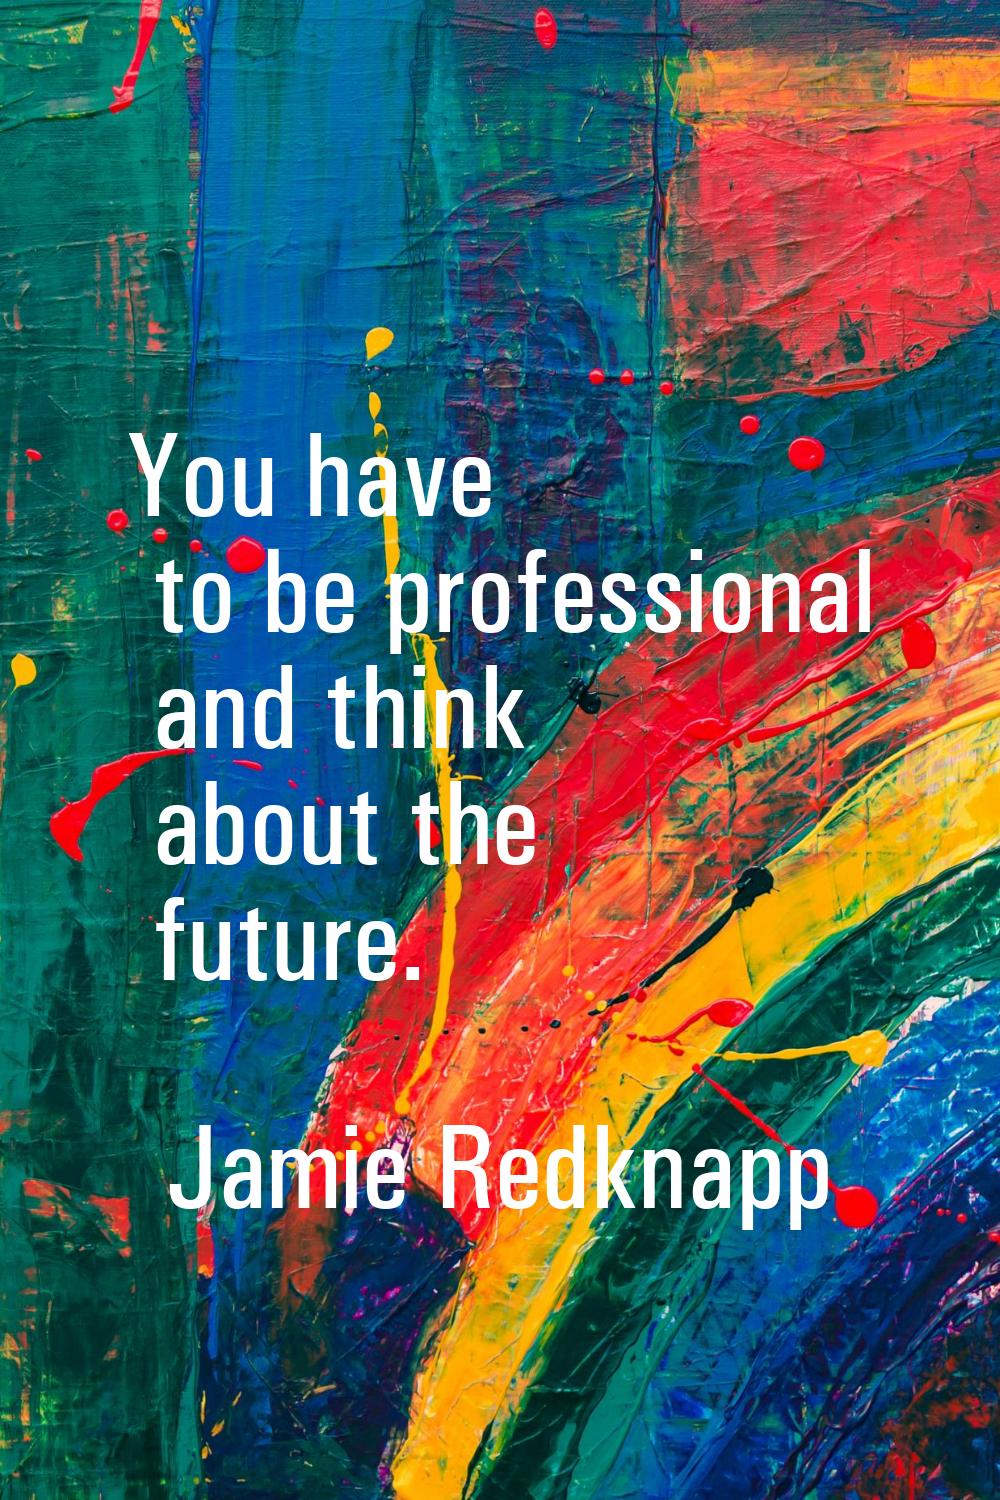 You have to be professional and think about the future.